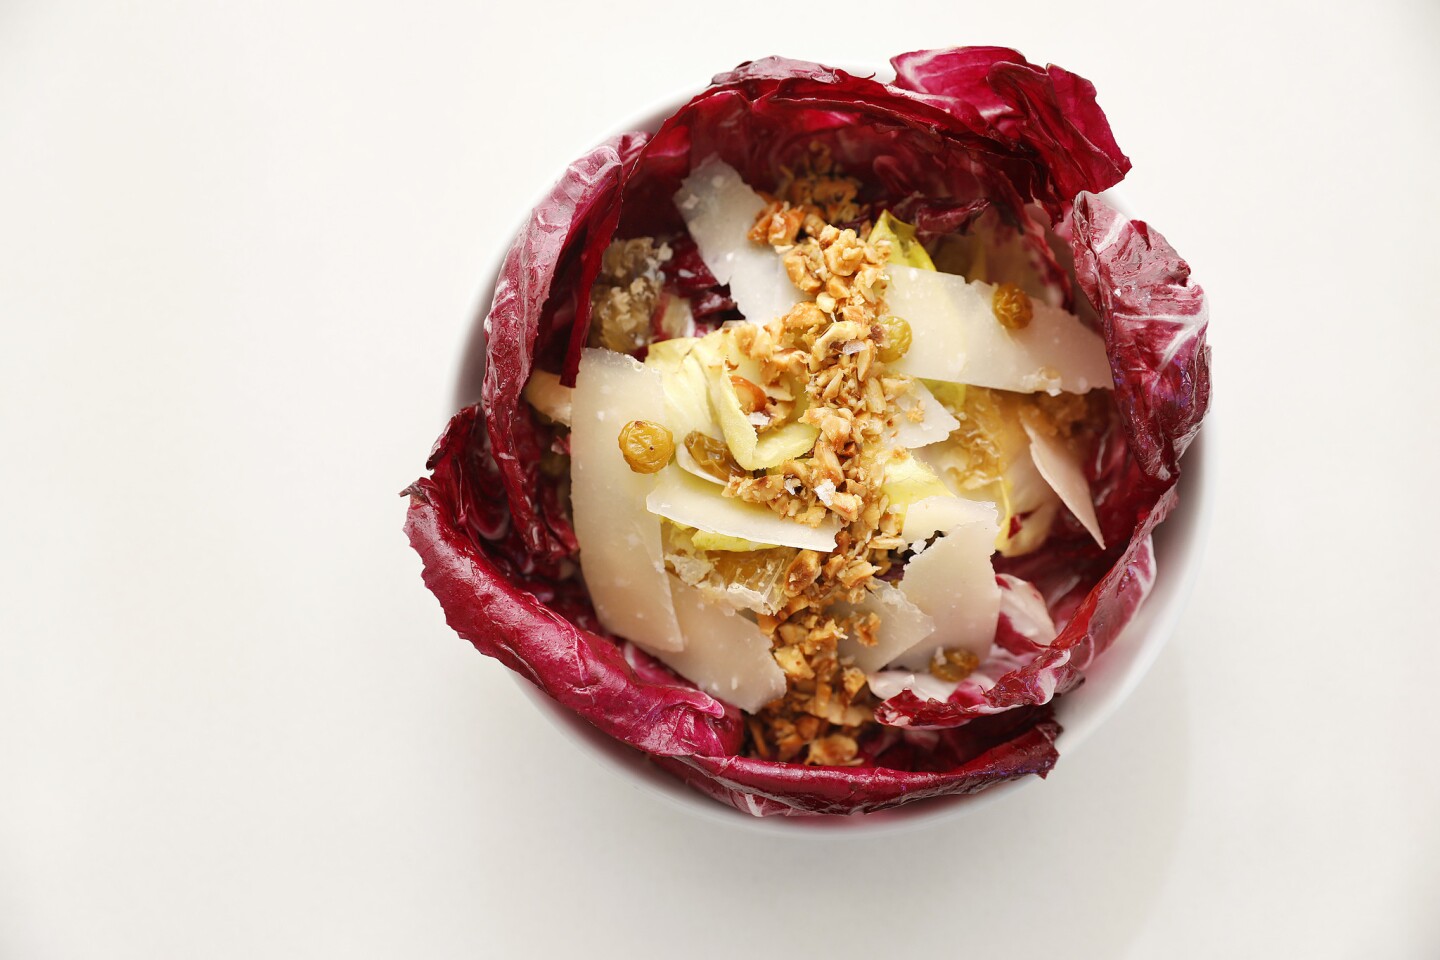 The roasted radicchio at Dominique Ansel's new restaurant 189 at the Grove comes with fresh honeycomb, endive, hazelnuts, shaved manchego and lemon hazelnut vinaigrette.